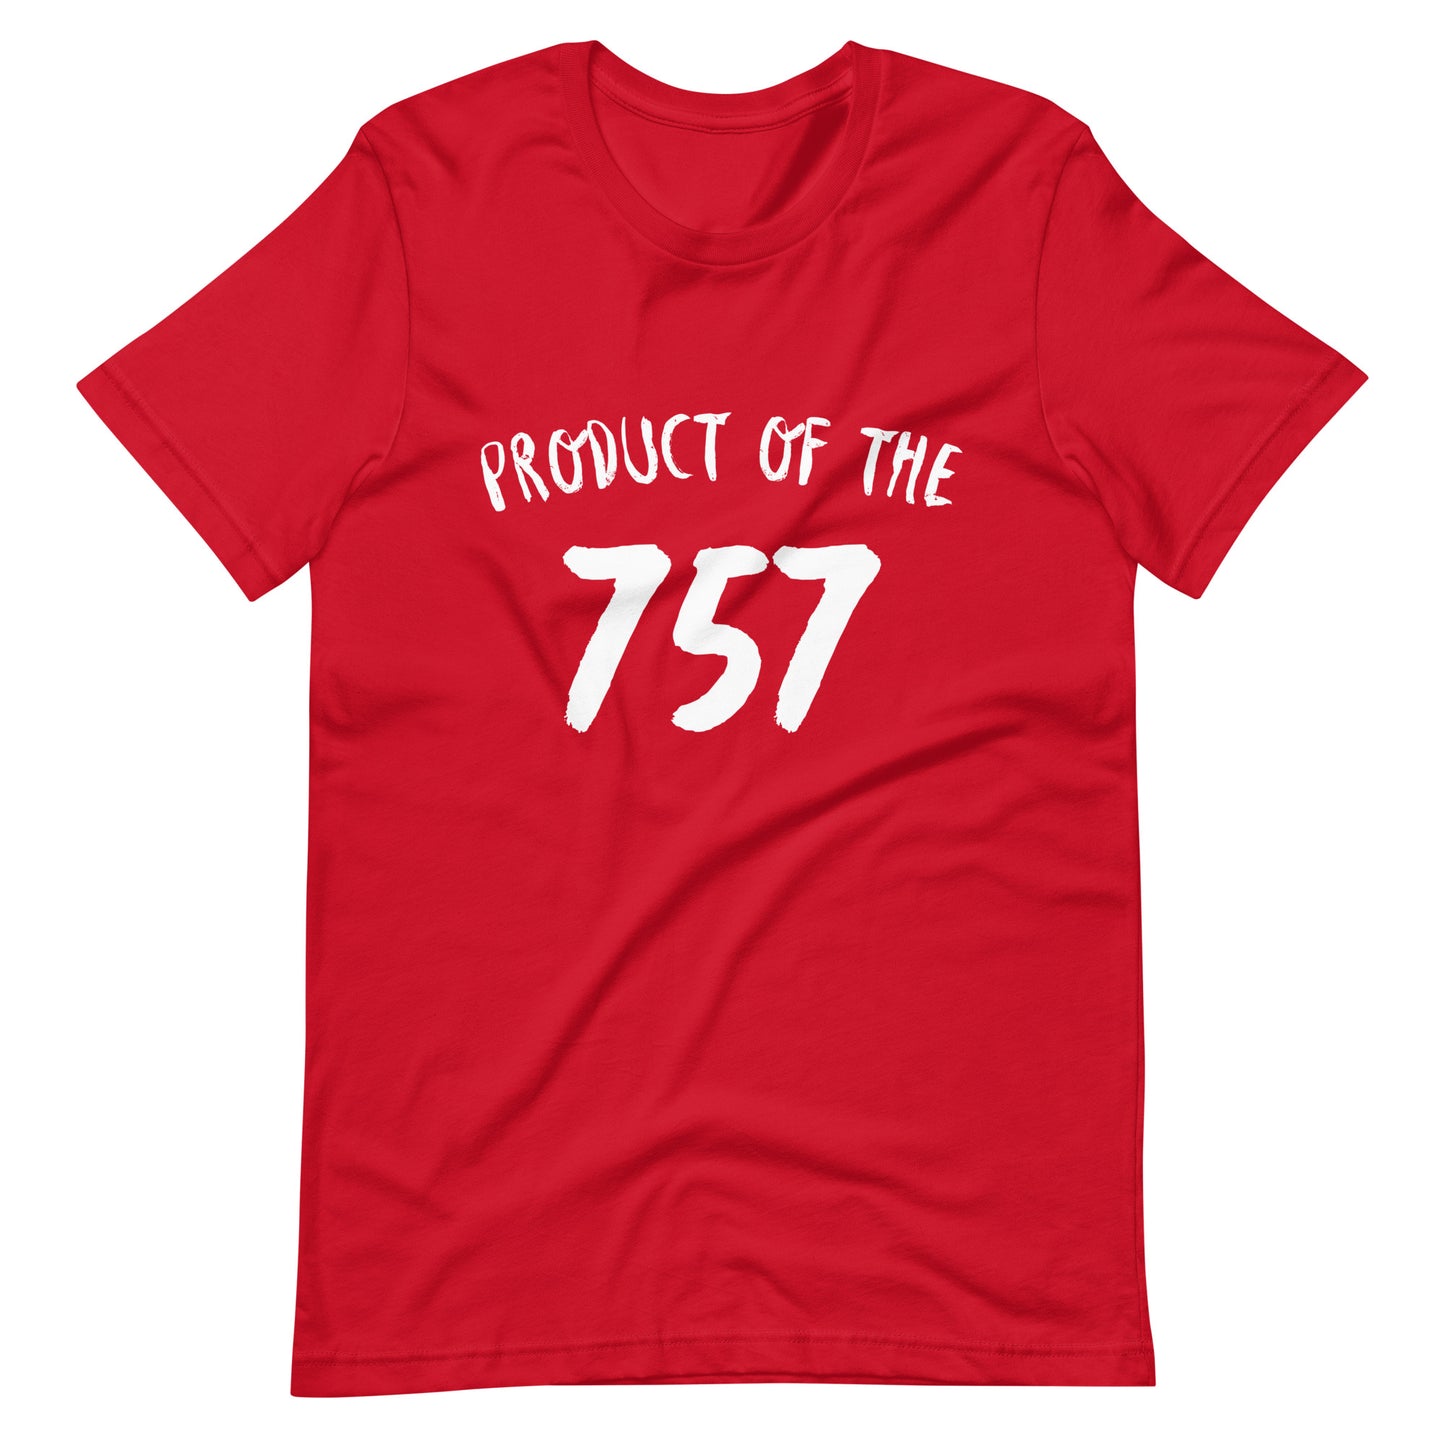 Product of the "757" Unisex t-shirt